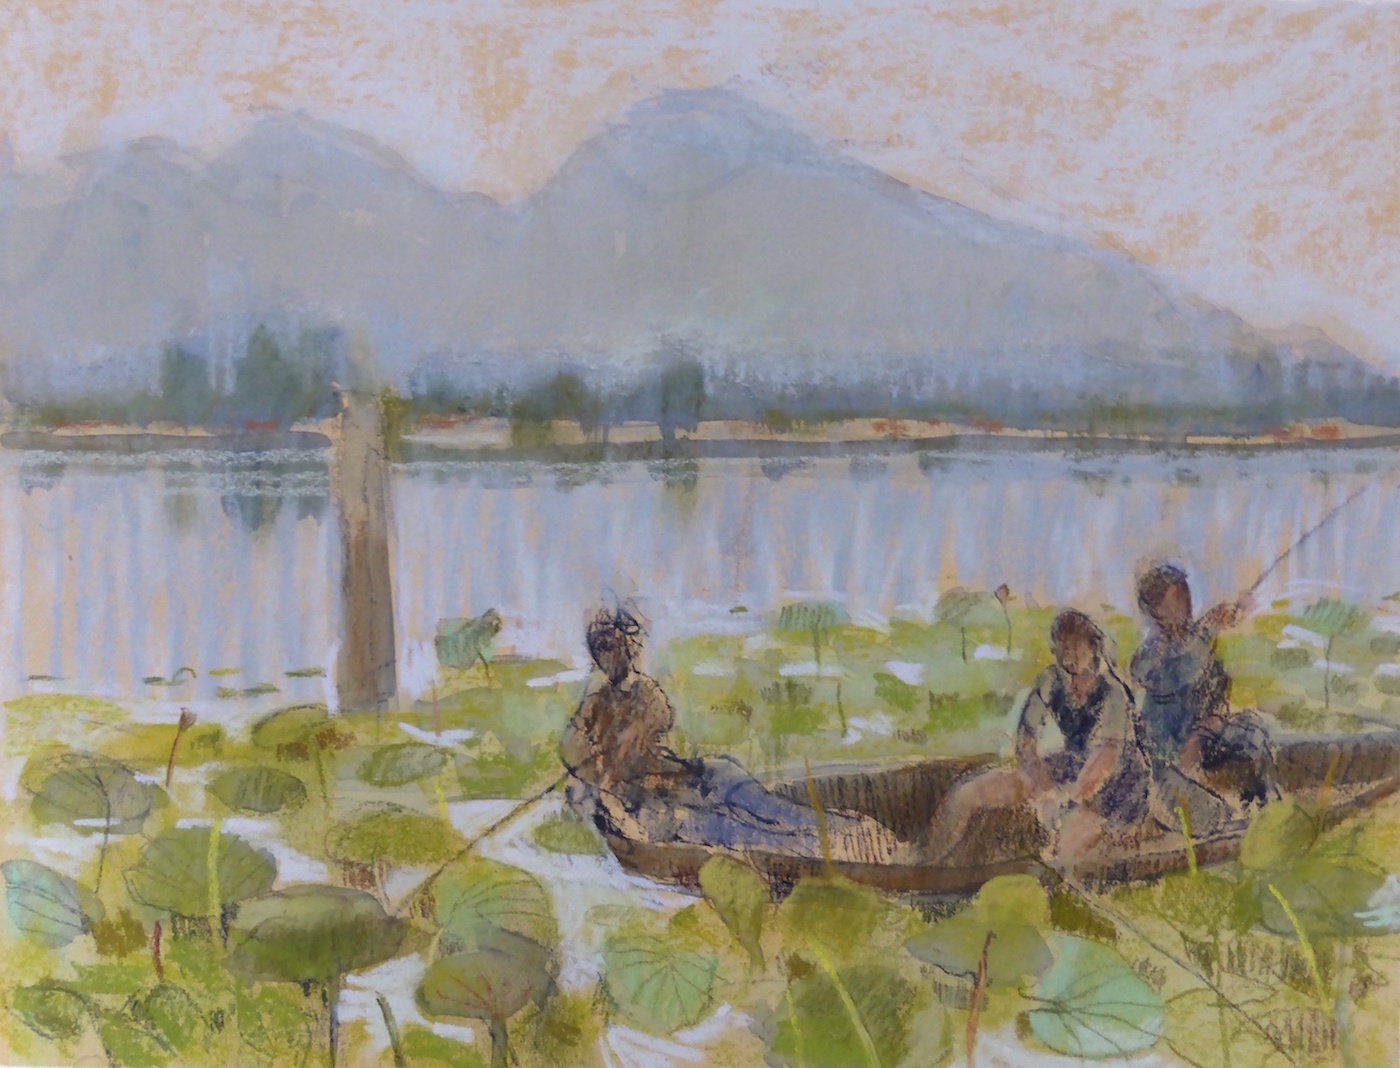 Felicity House, "Boys Fishing - Lake Nagin, Kashmir," 2013, assorted pastels on Art Spectrum paper 9 x 11 in. Available. One of my favourite pieces.